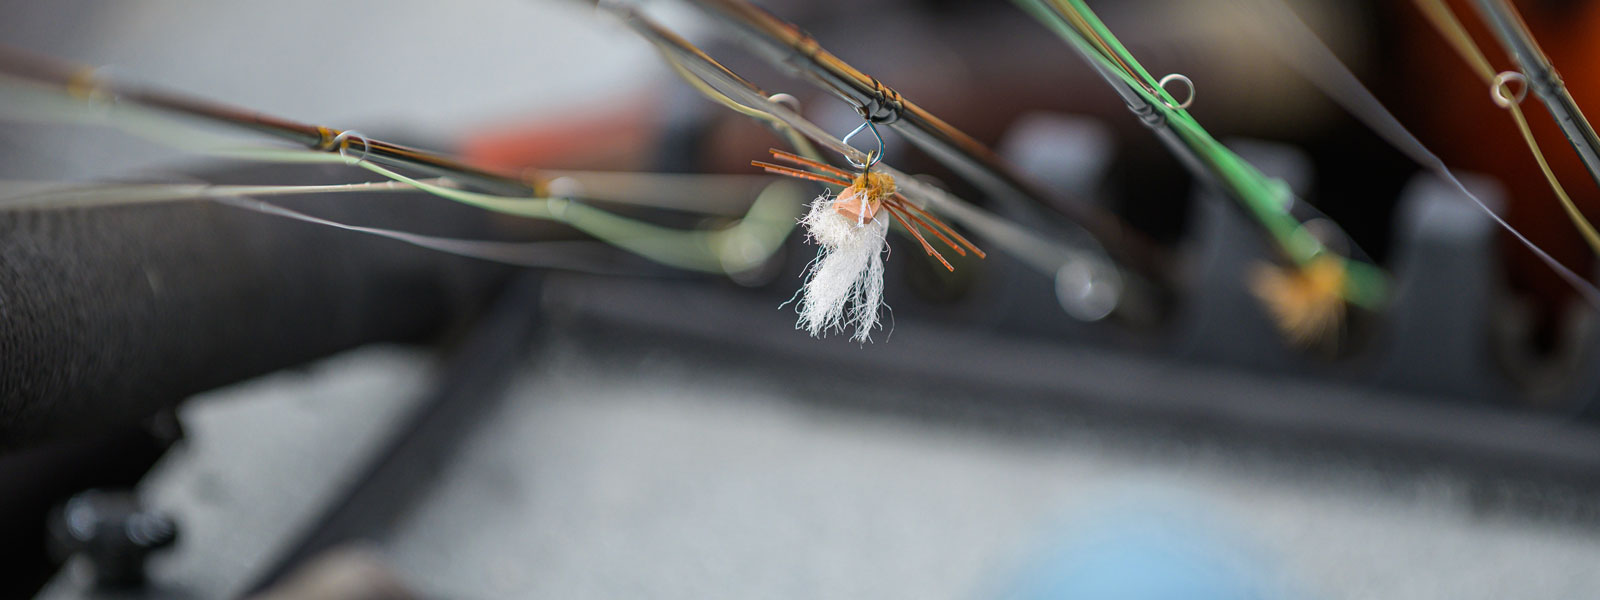 Jigged Stonefly Nymph Fly Tying Video  The Caddis Fly: Oregon Fly Fishing  Blog